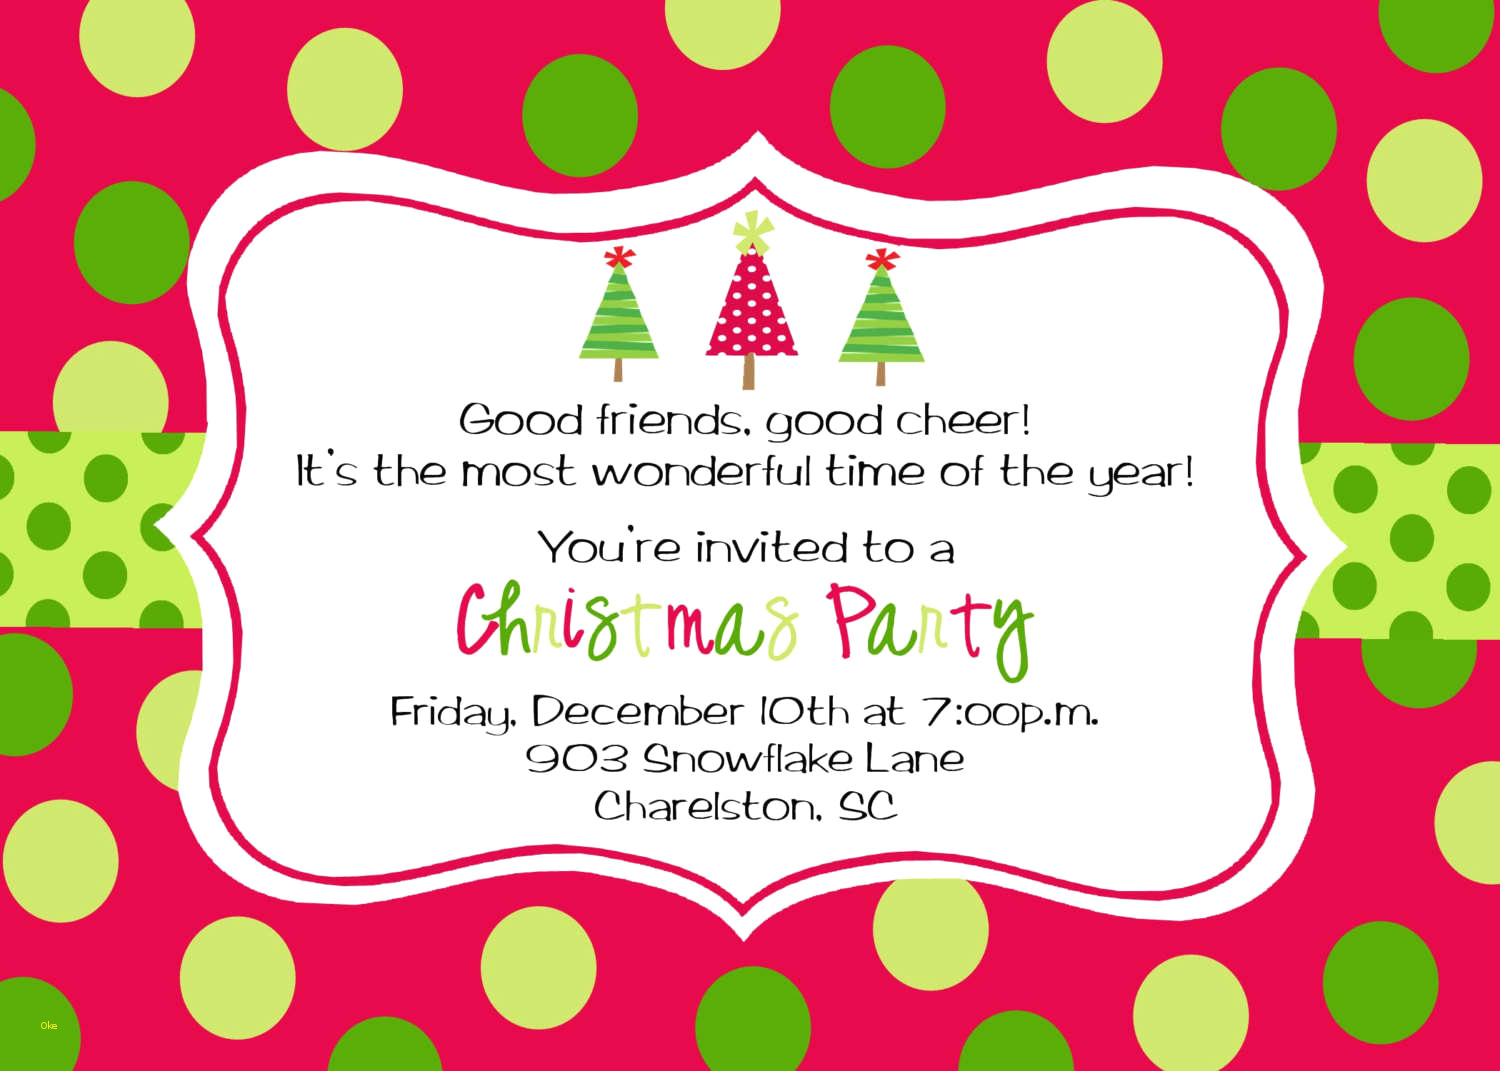 Printable Christmas Party Invitations | Download Them Or Print - Free Printable Christmas Party Invitations